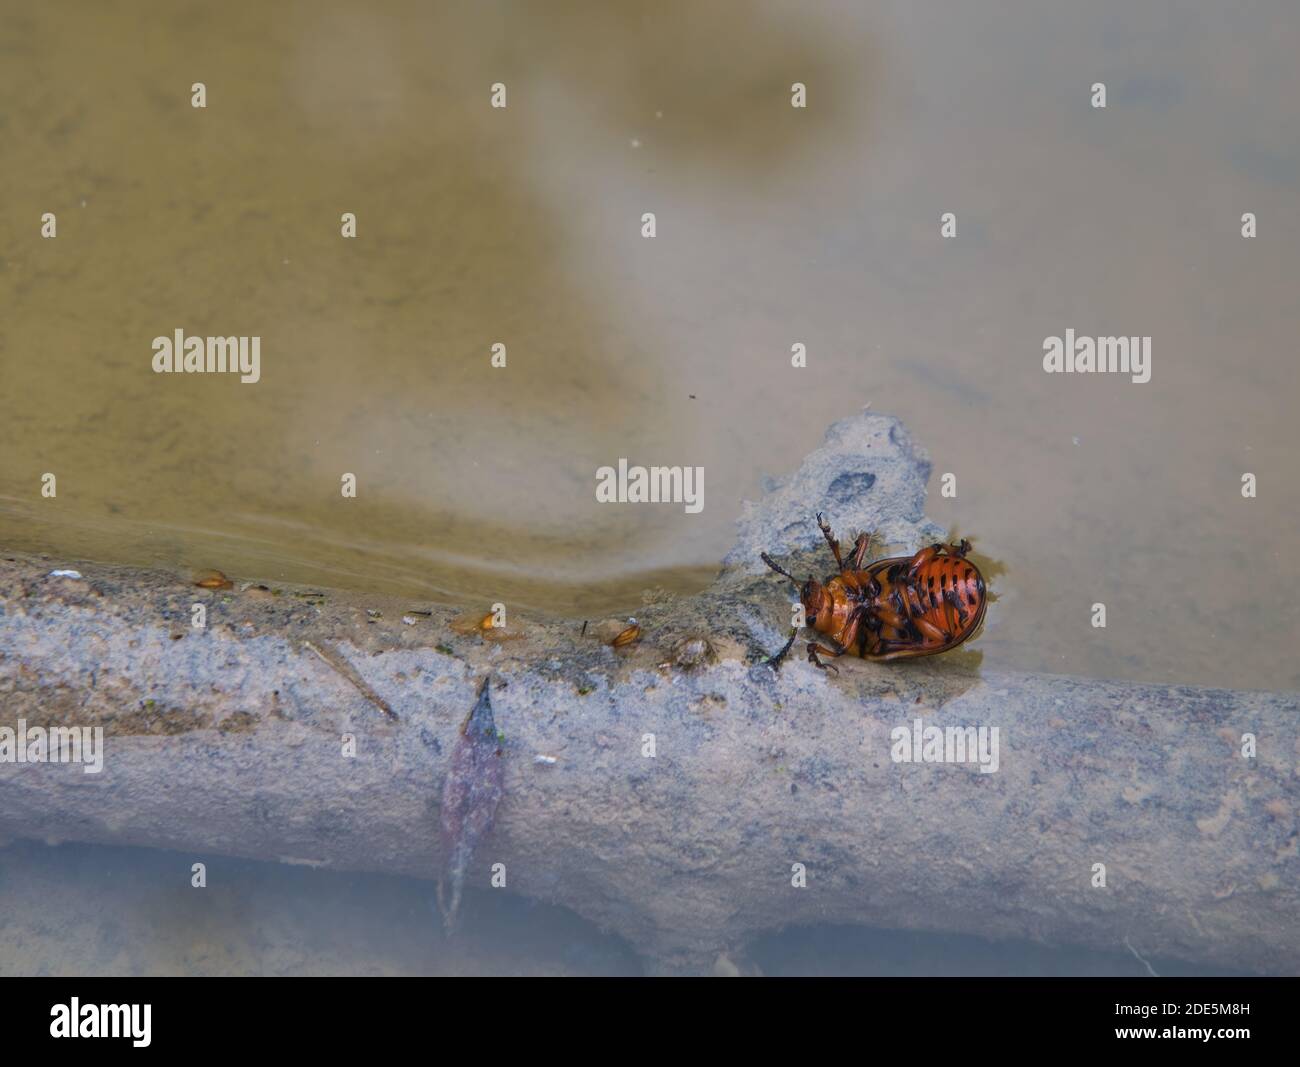 A Colorado potato beetle lies on its back on a sunken branch with its feet pointing upwards in a natural pond at the mercy of the enemy. Stock Photo